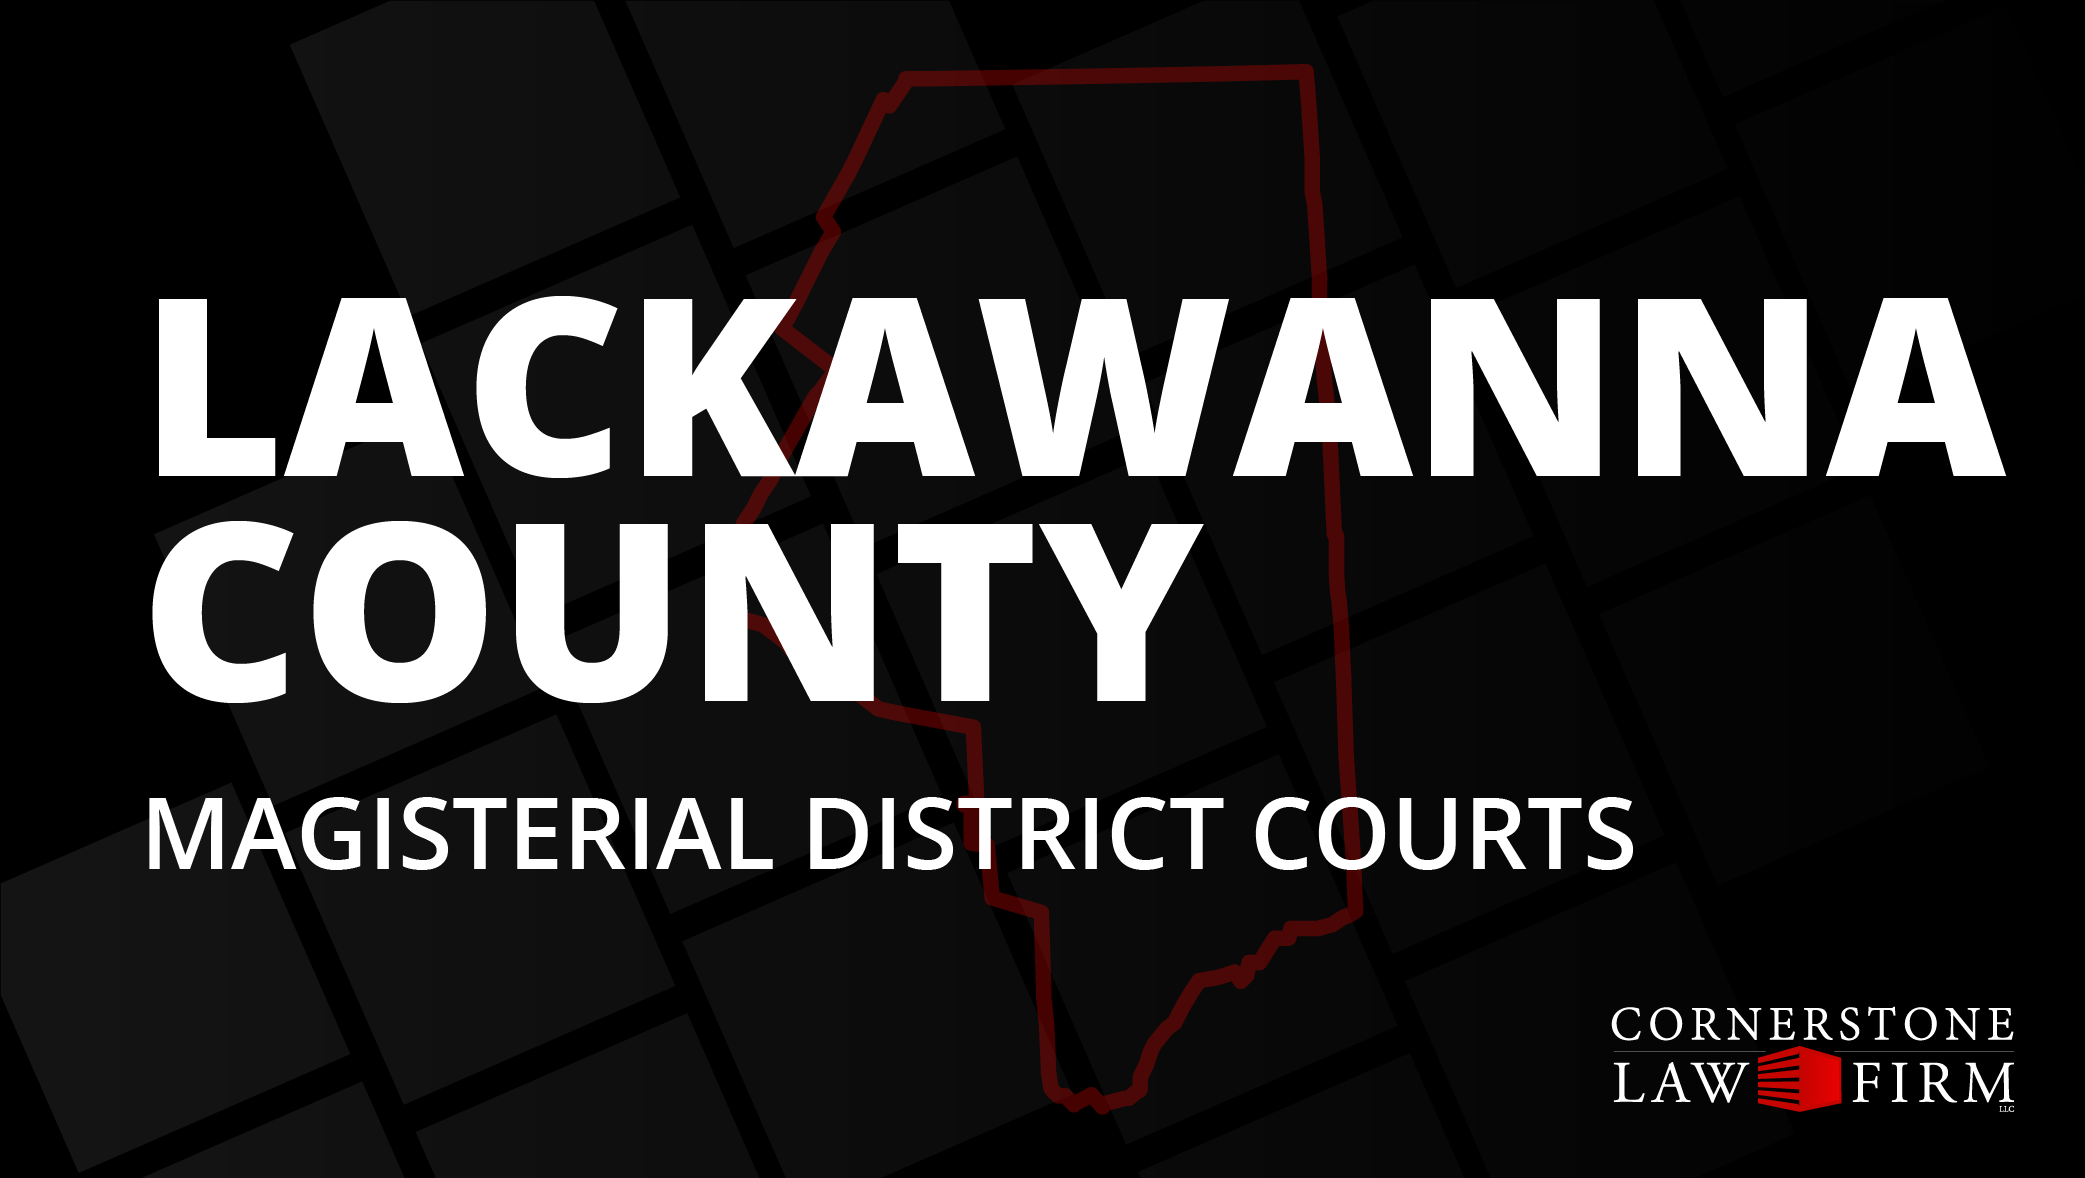 The words "Lackawanna County Magisterial District Courts" over a black background with a faded red outline of the county.